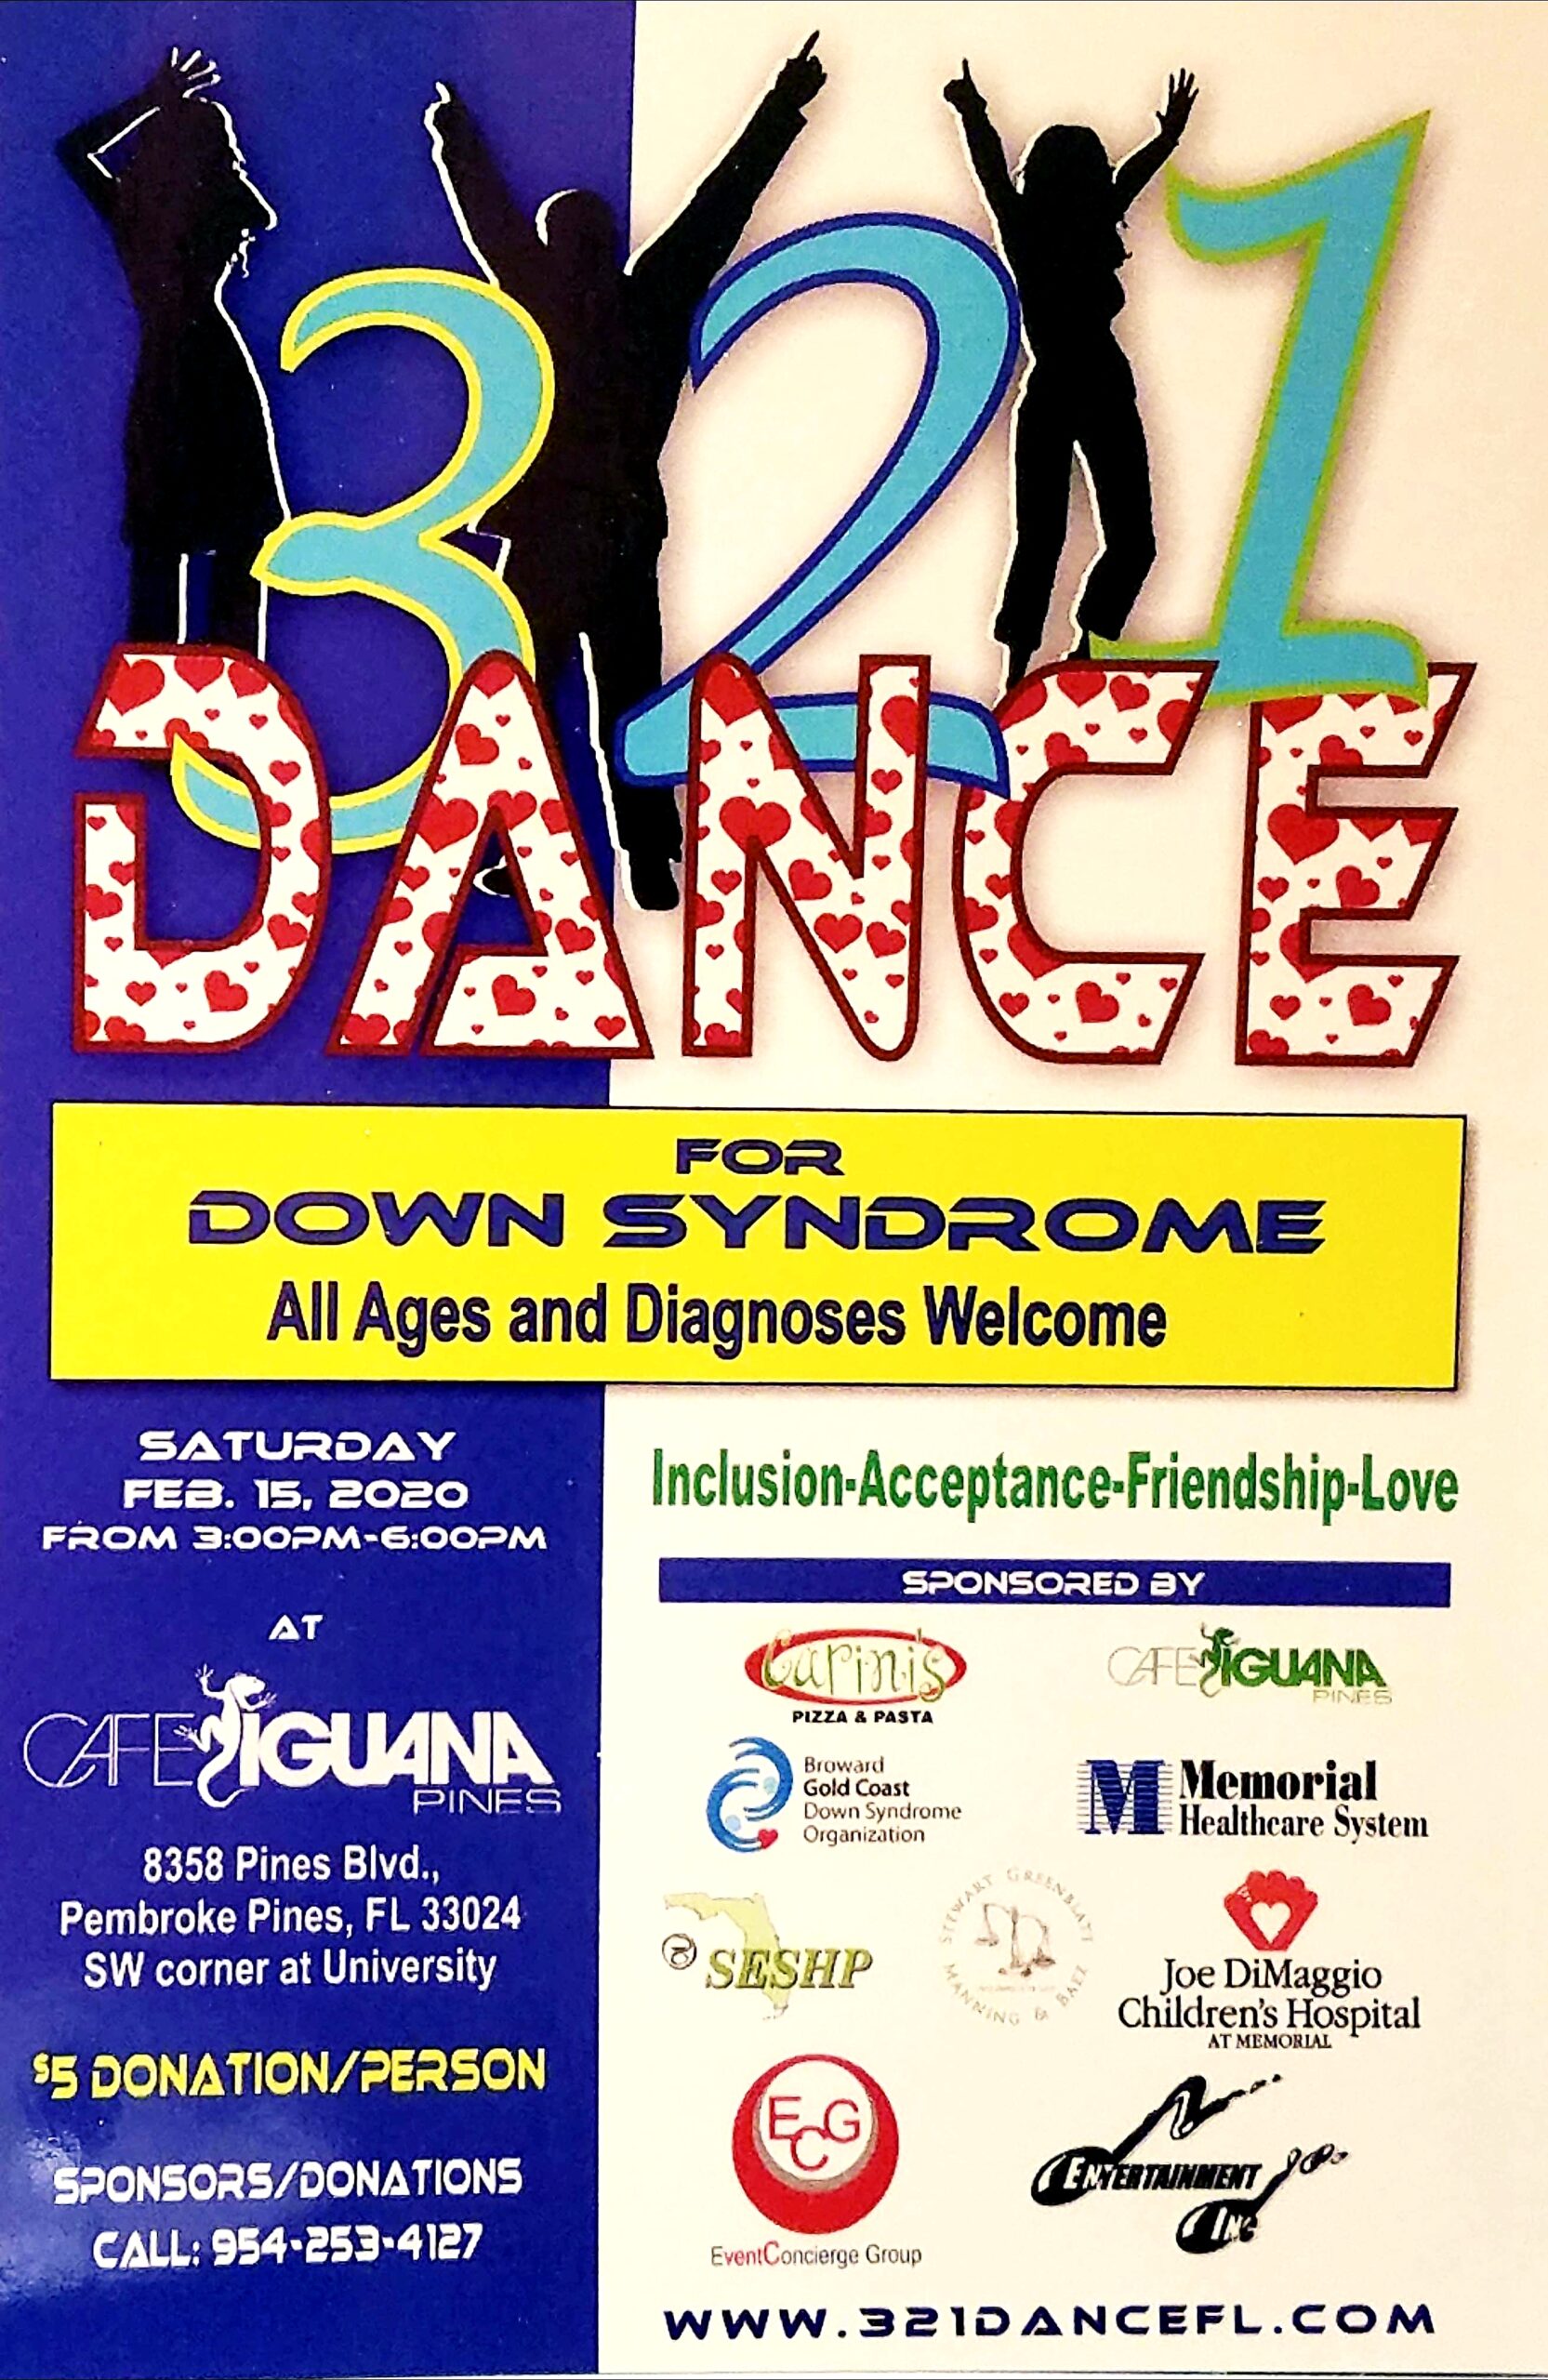 321 Dance for Down Syndrome 2-15-2020